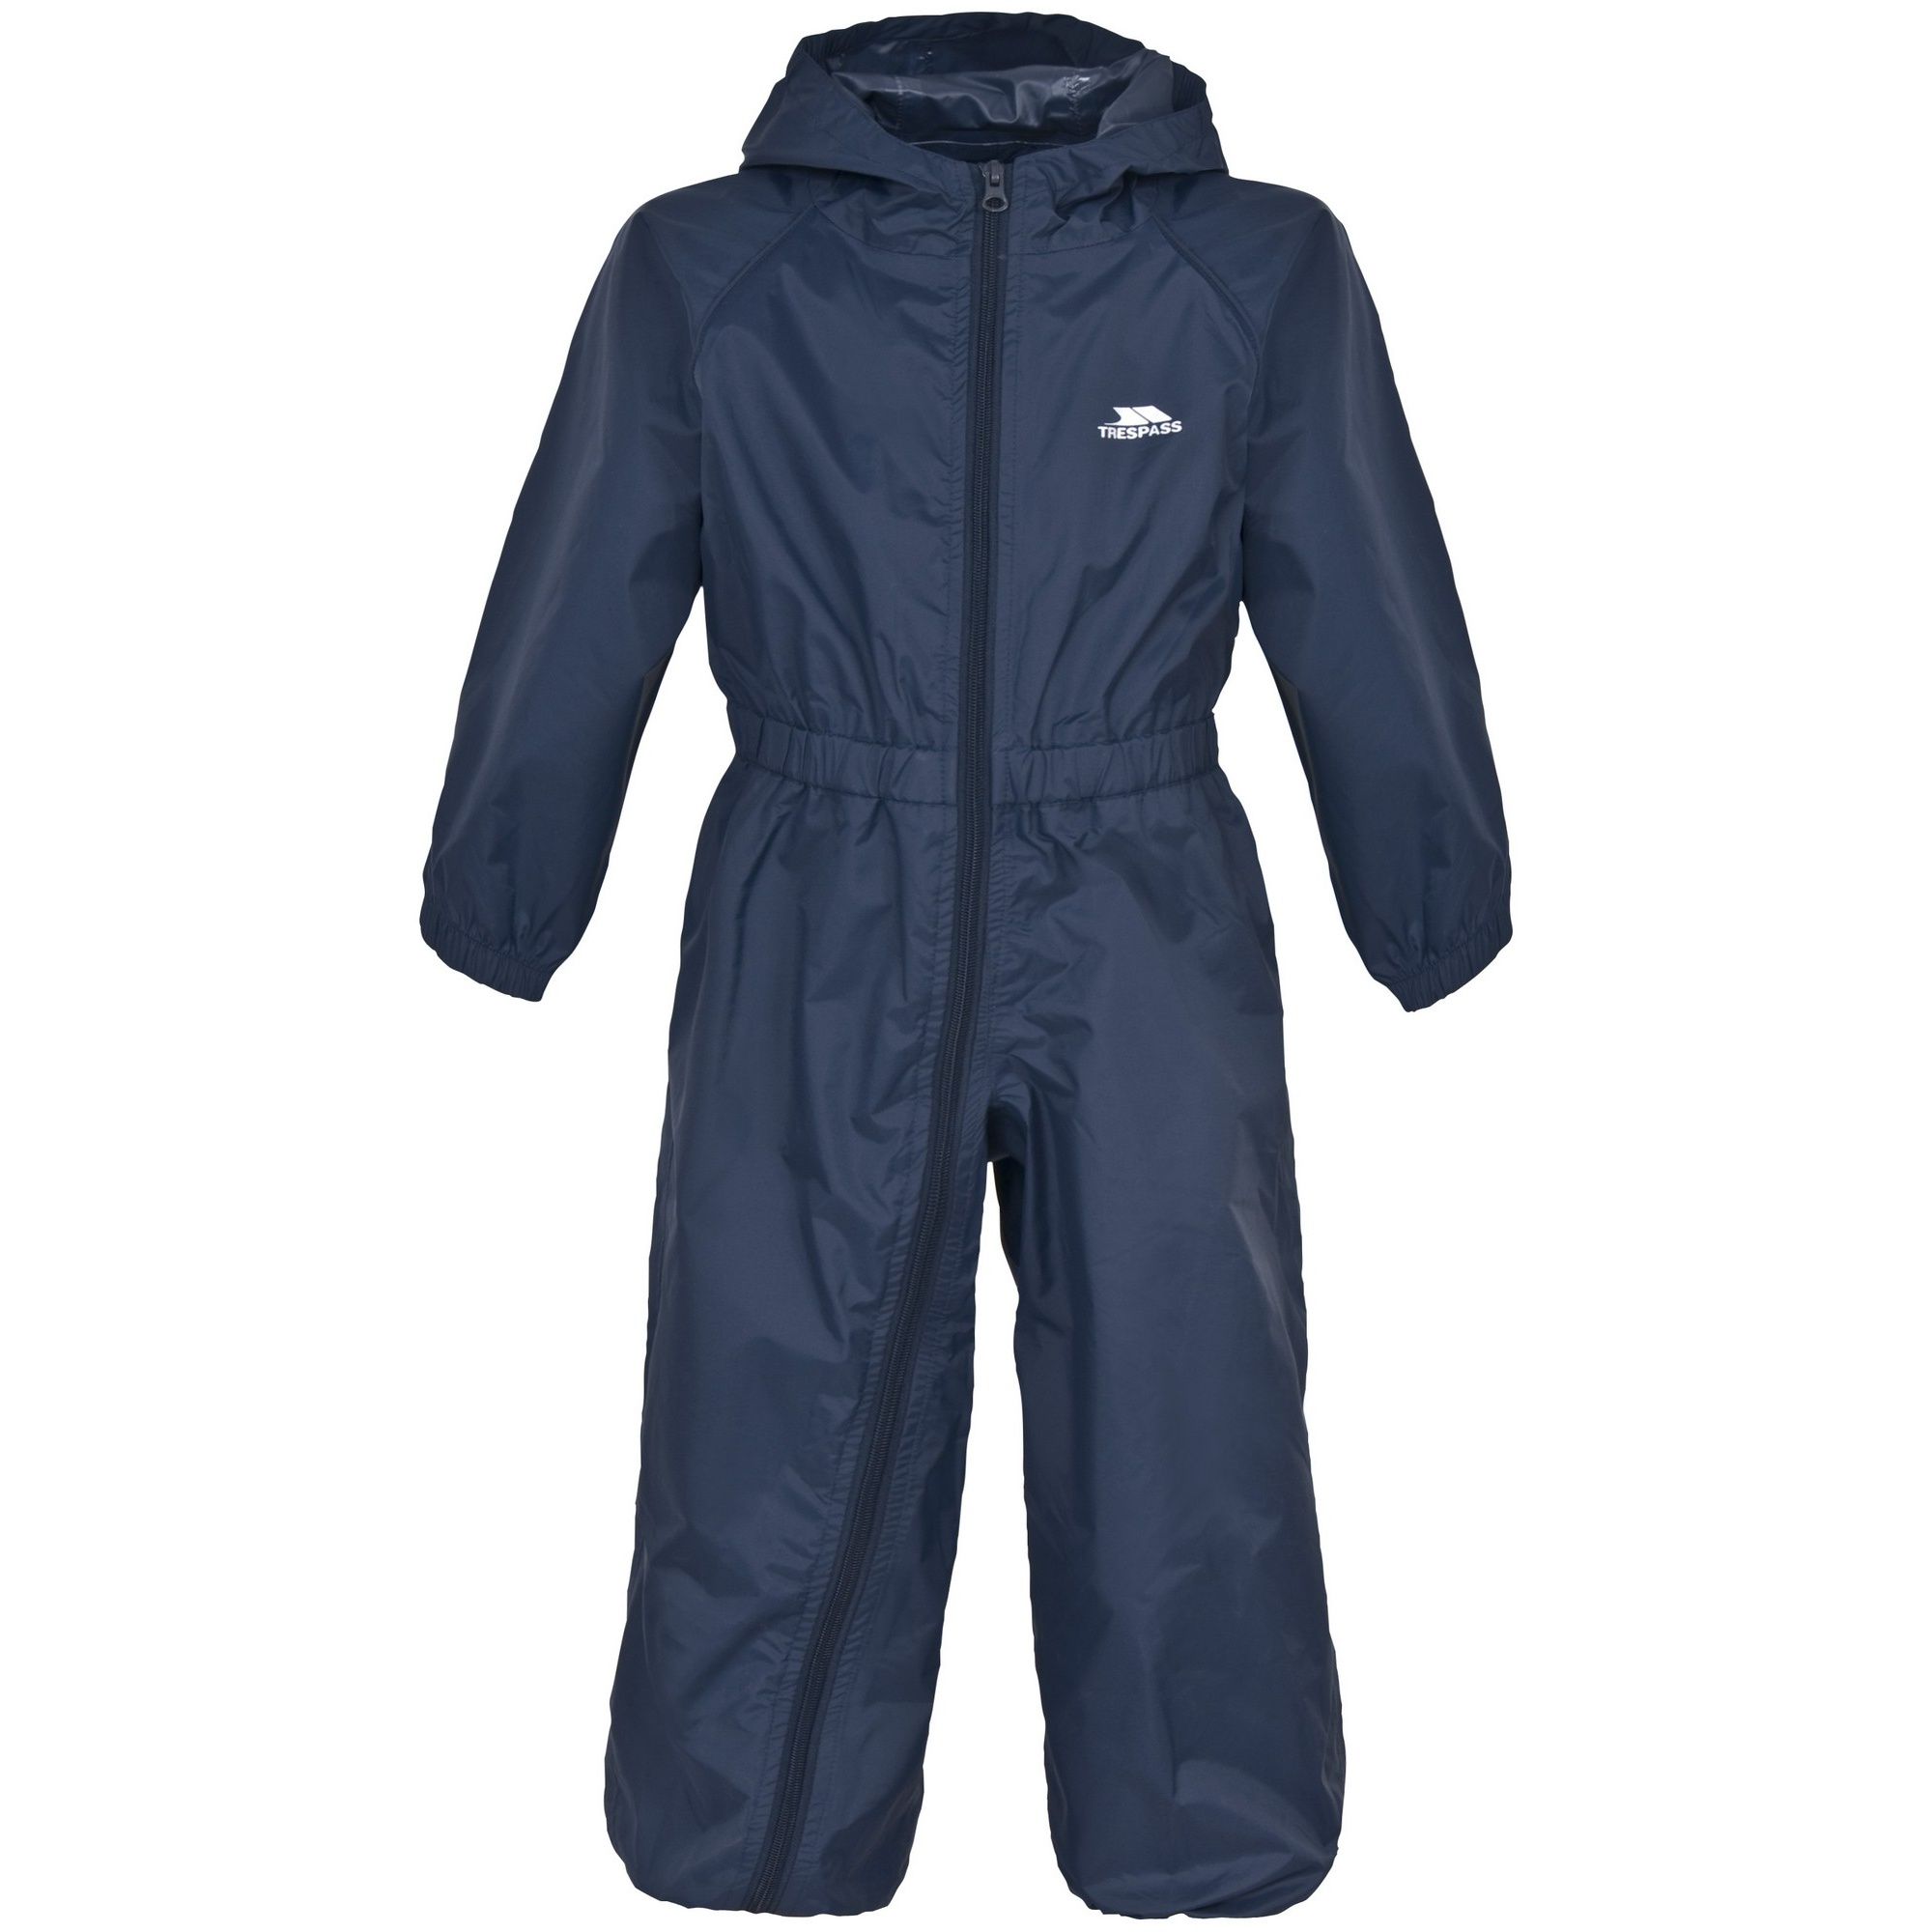 Material: 100% PU coated polyamide PU. Unisex shell kids rain suit. Grown on hood. Full body length front zip. Elasticated side waist. Elasticated cuff and ankles.